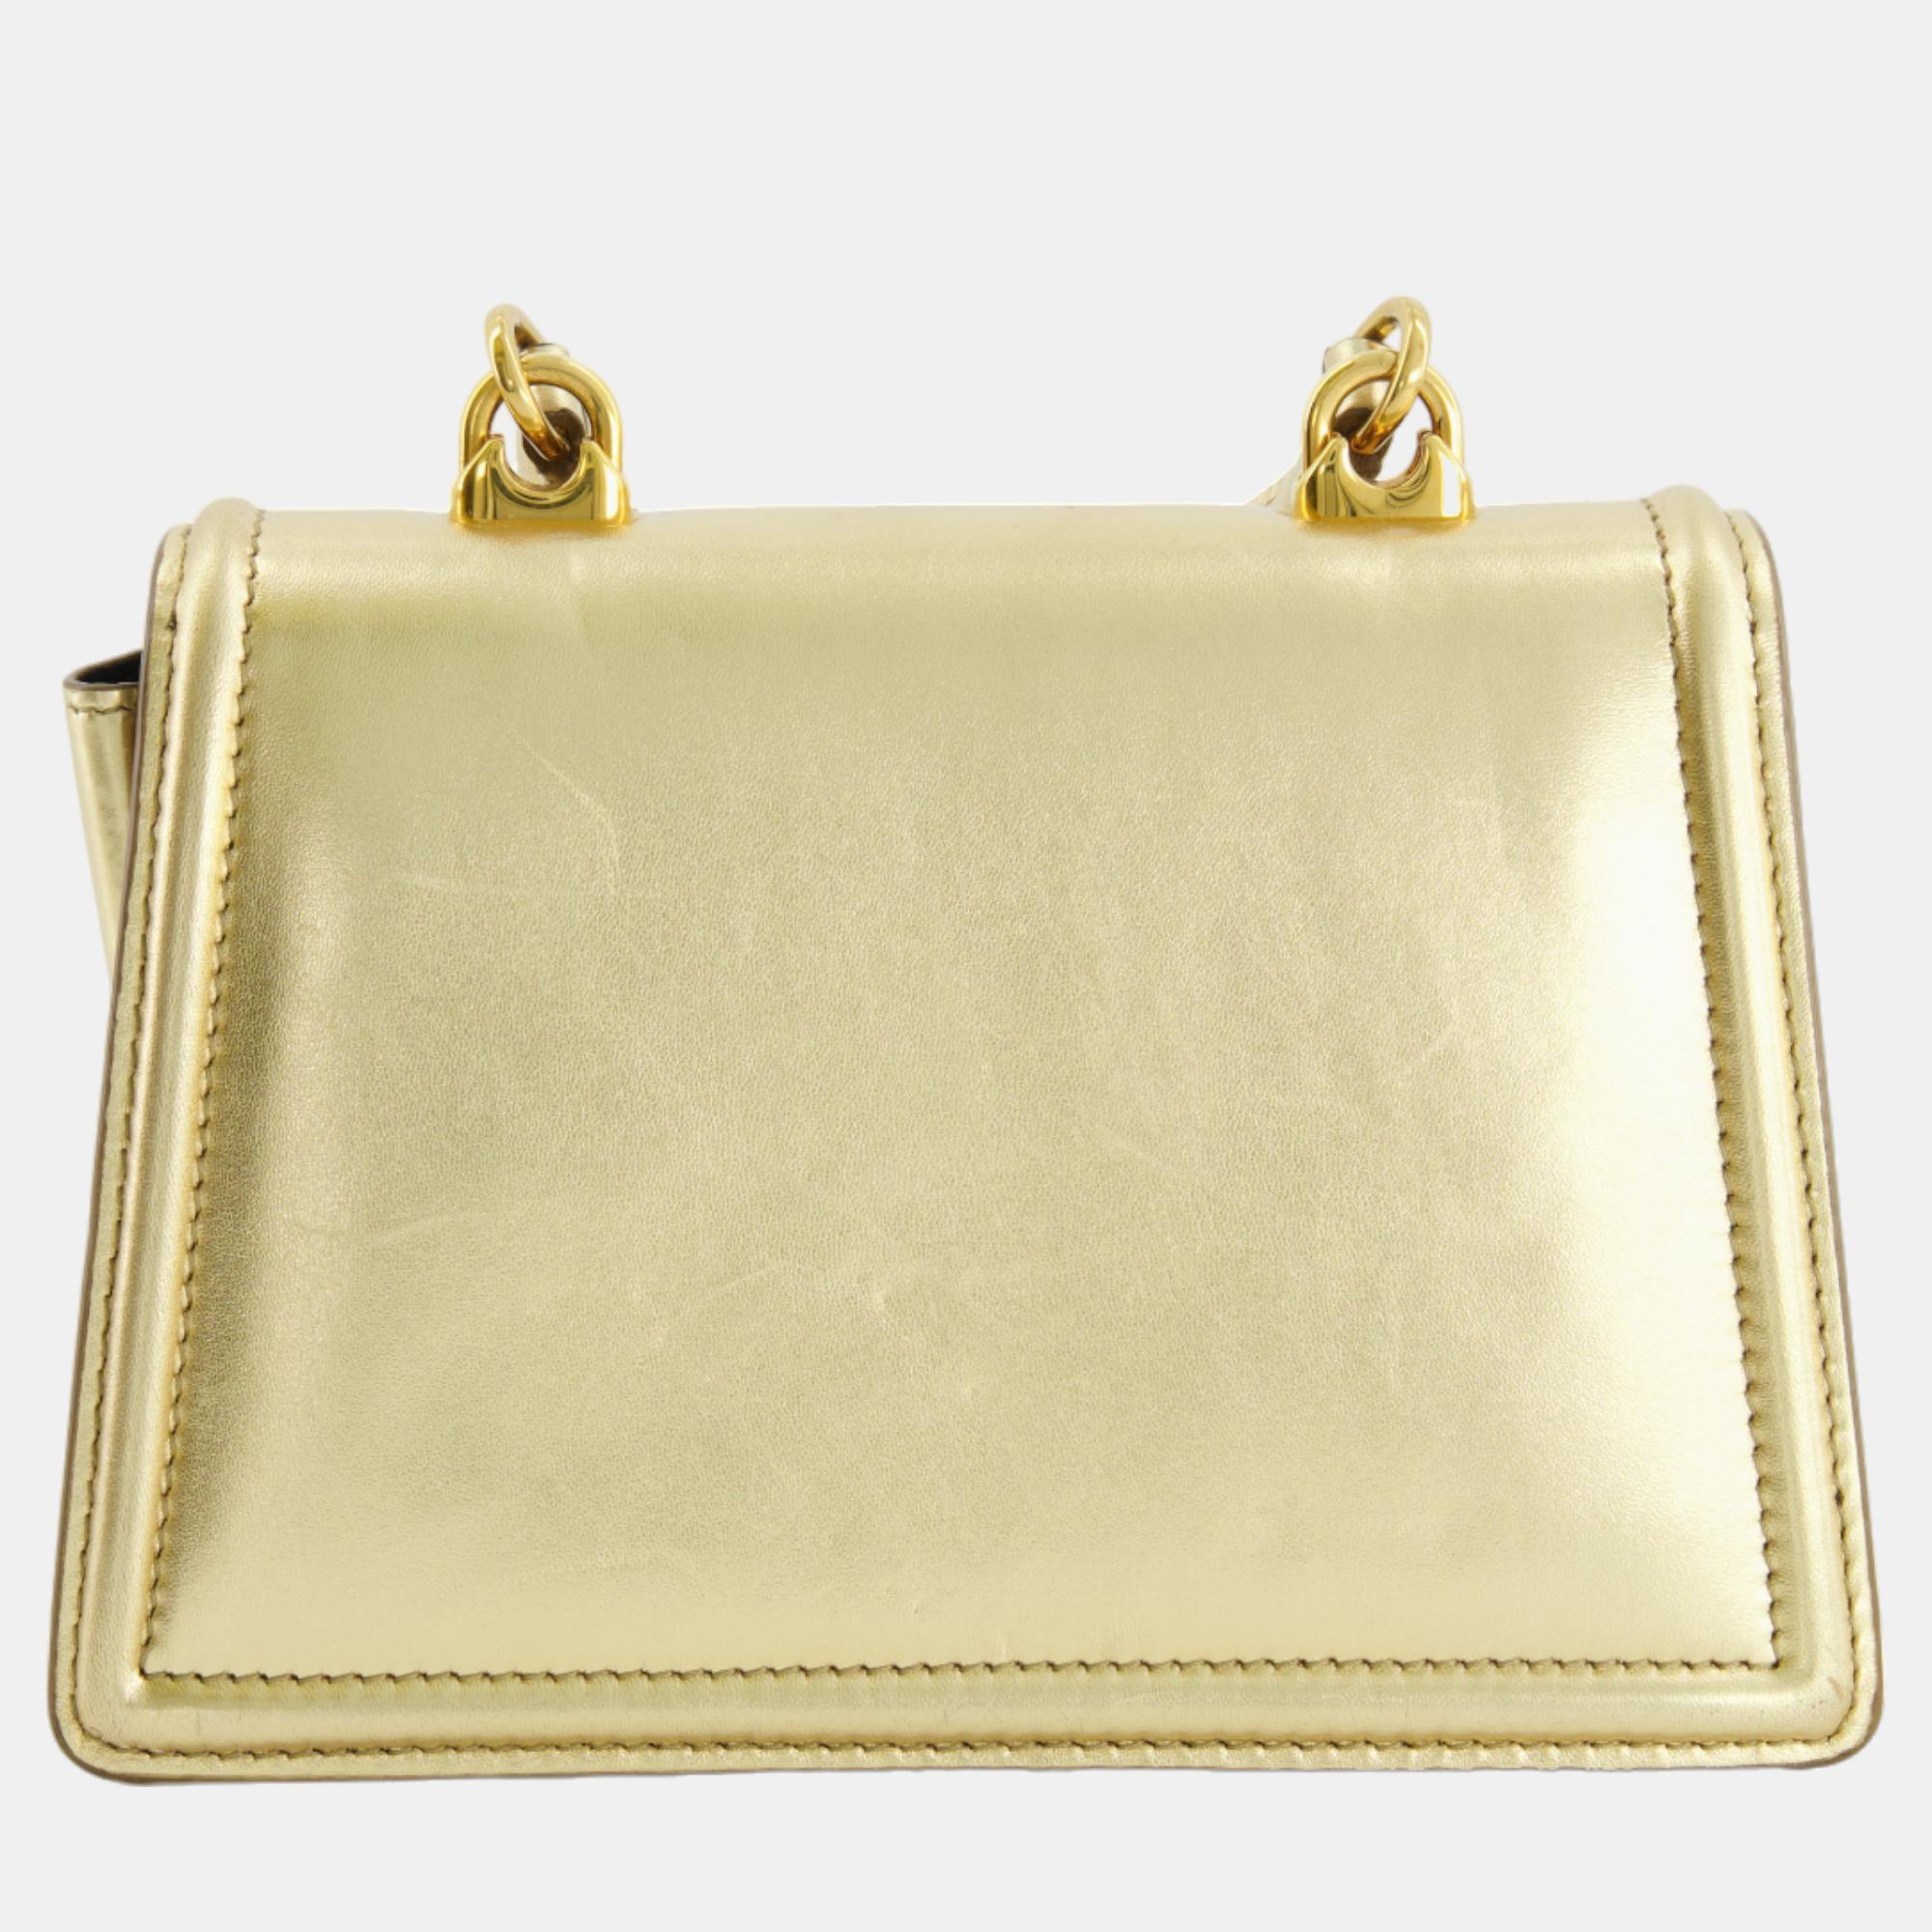 

Dolce & Gabbana Gold Leather Small Devotion Top-Handle Bag with Gold Hardware